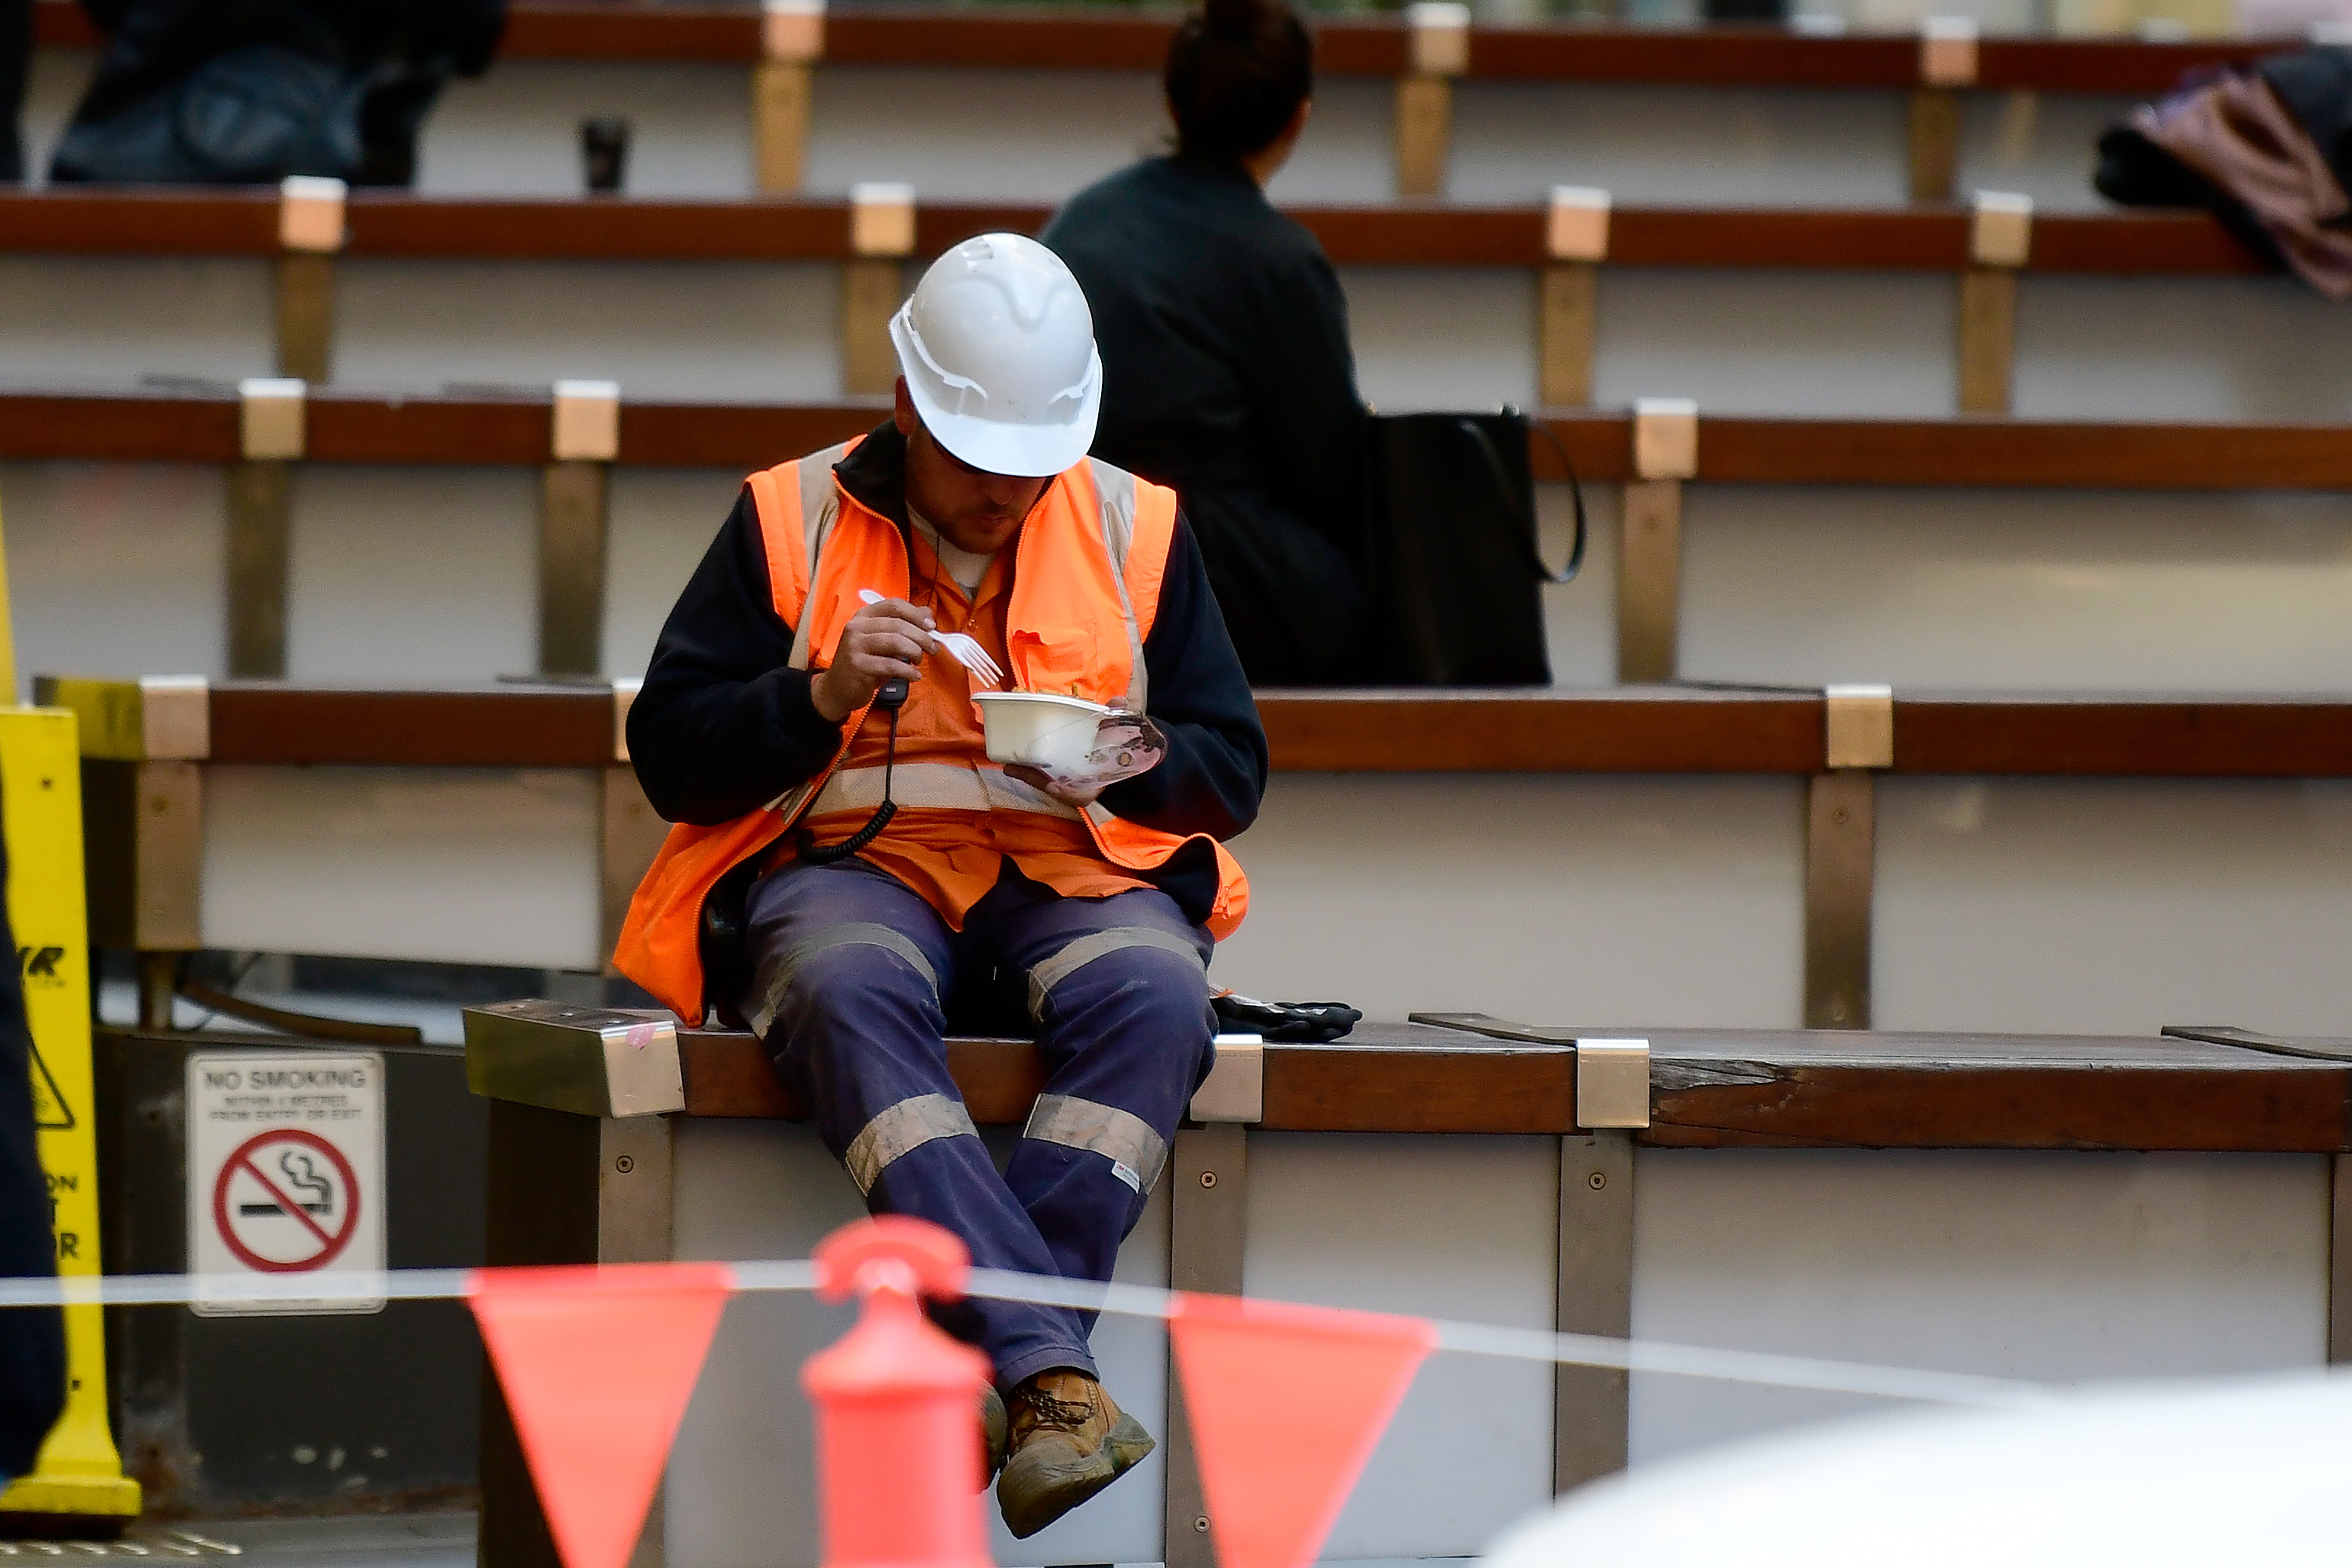 Youth unemployment in Australia has risen to an 18 month high, so what can be done about it?